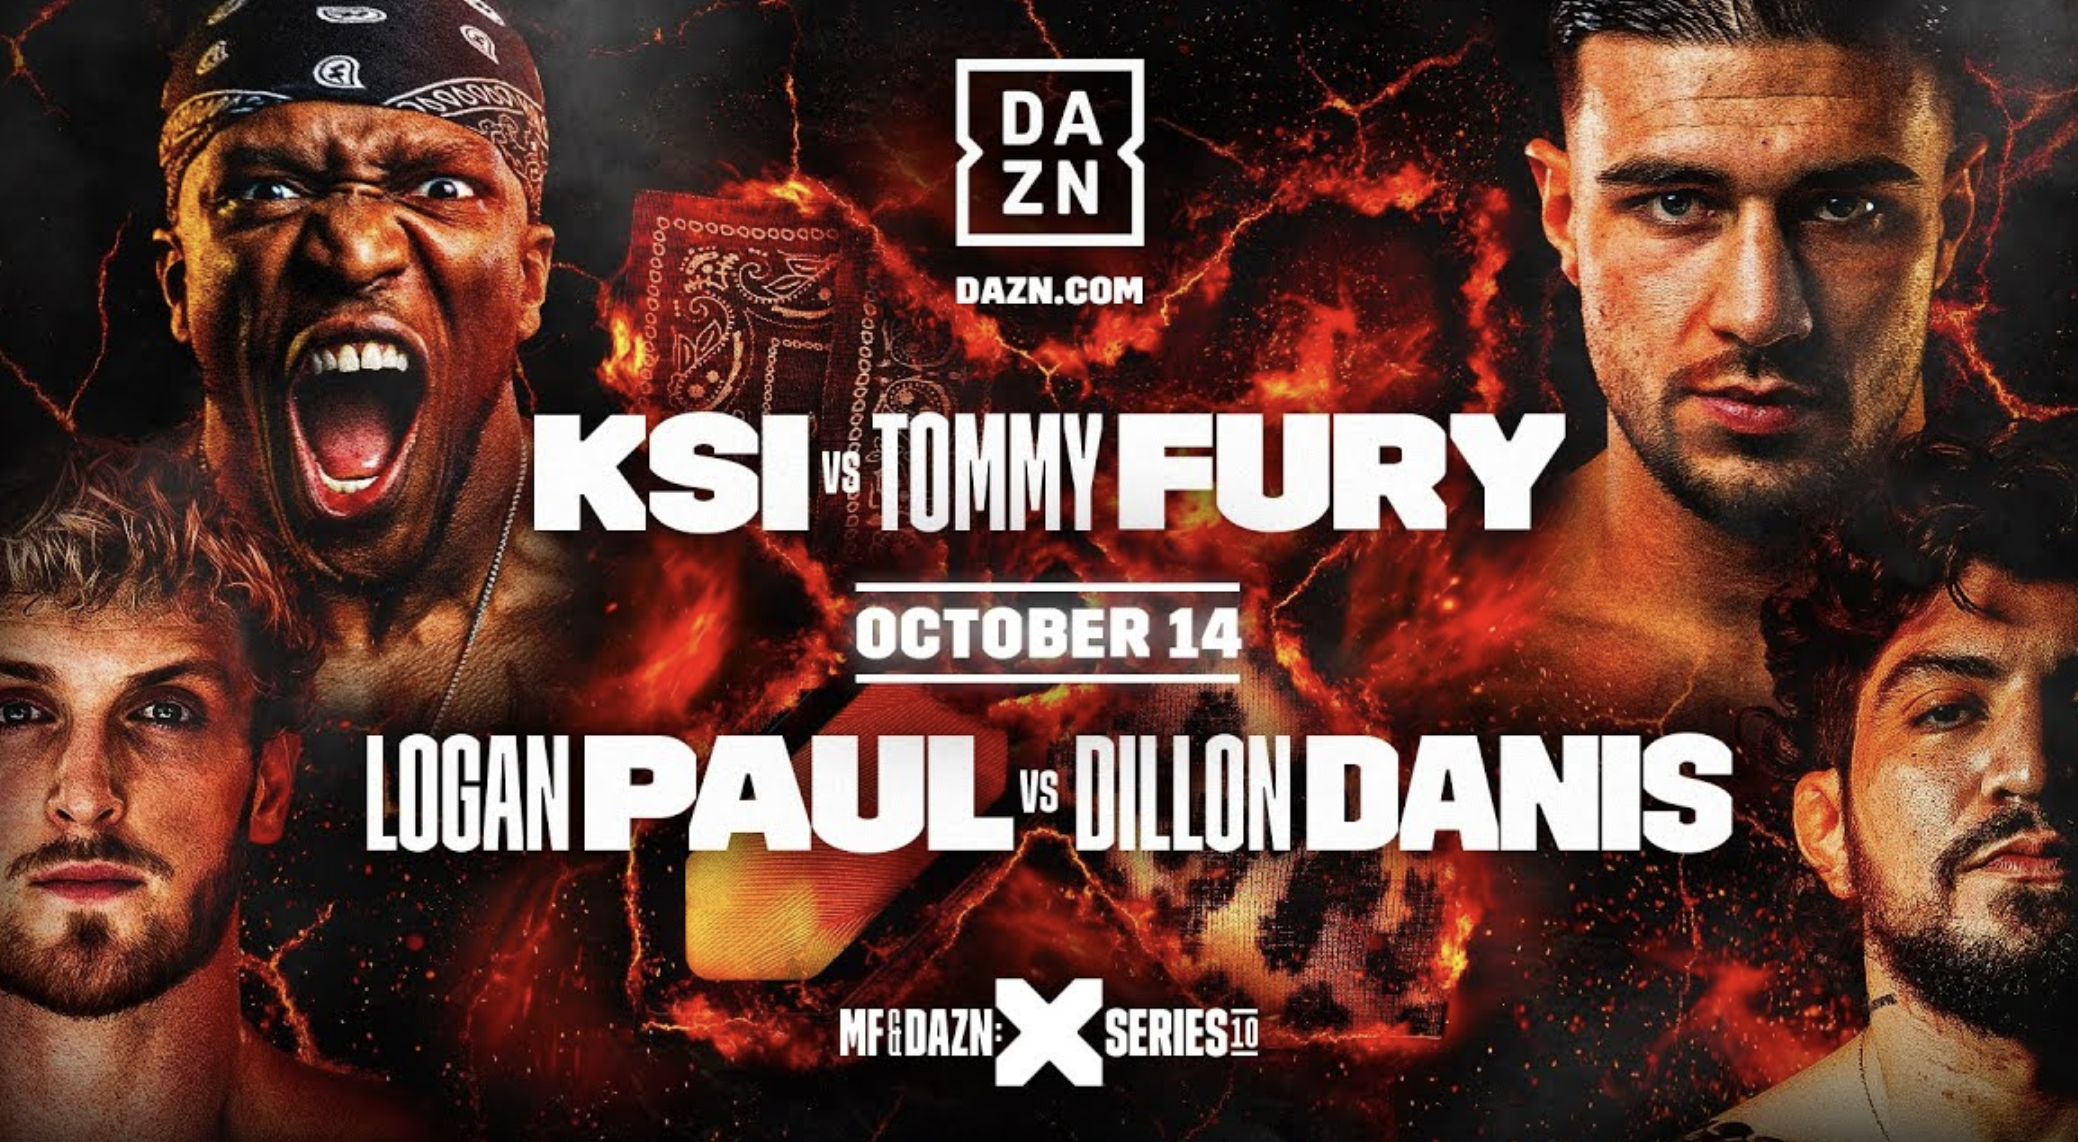 Is there a free Logan Paul vs. Dillon Danis live stream